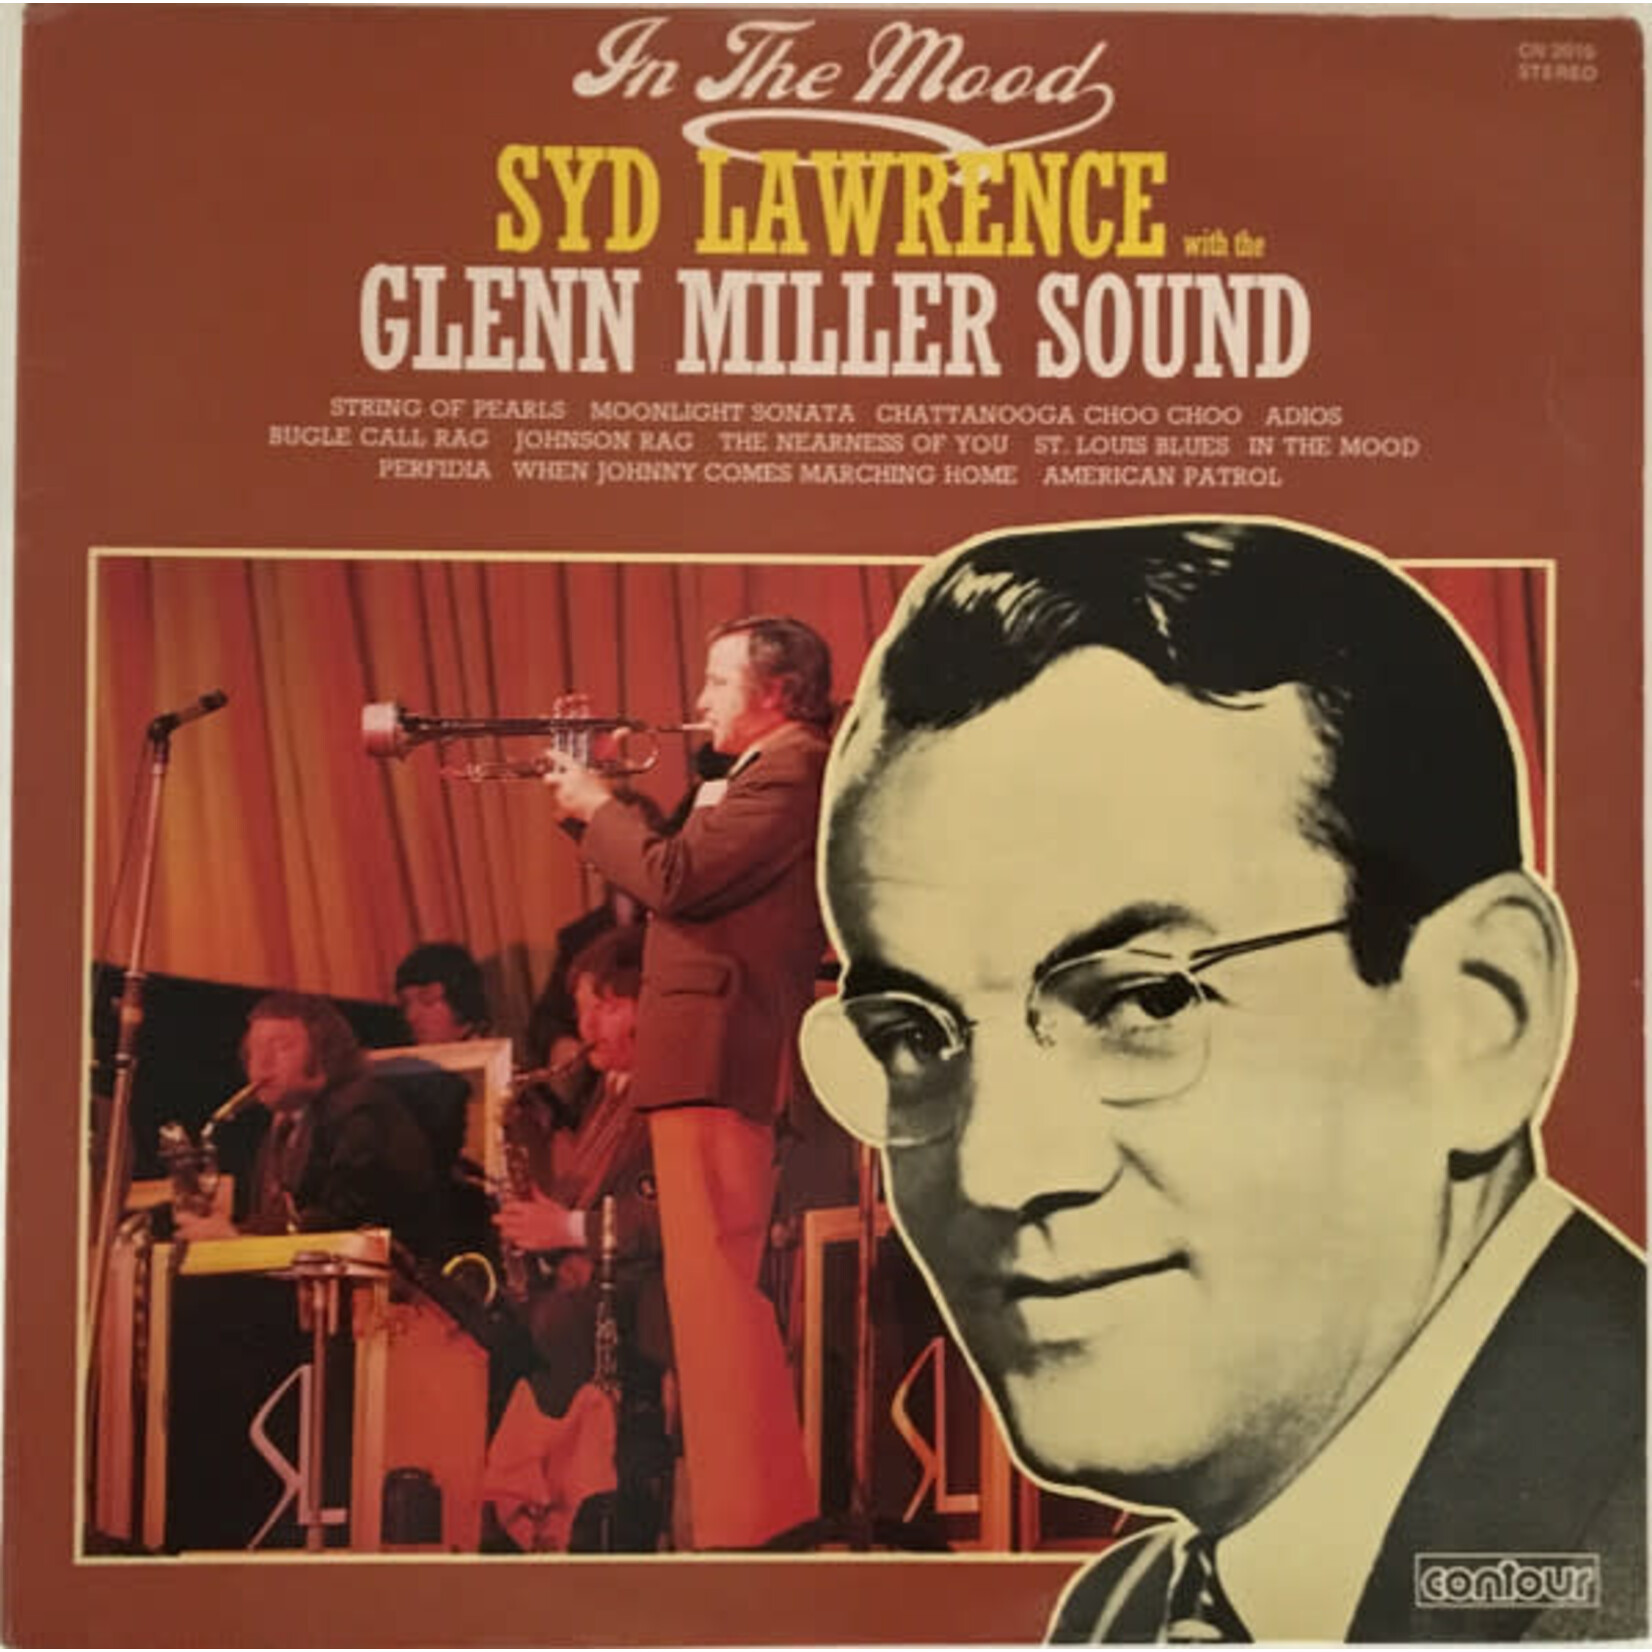 Syd Lawrence With The Glenn Miller Sound – In The Mood (VG, LP, Contour – CN 2015, UK)